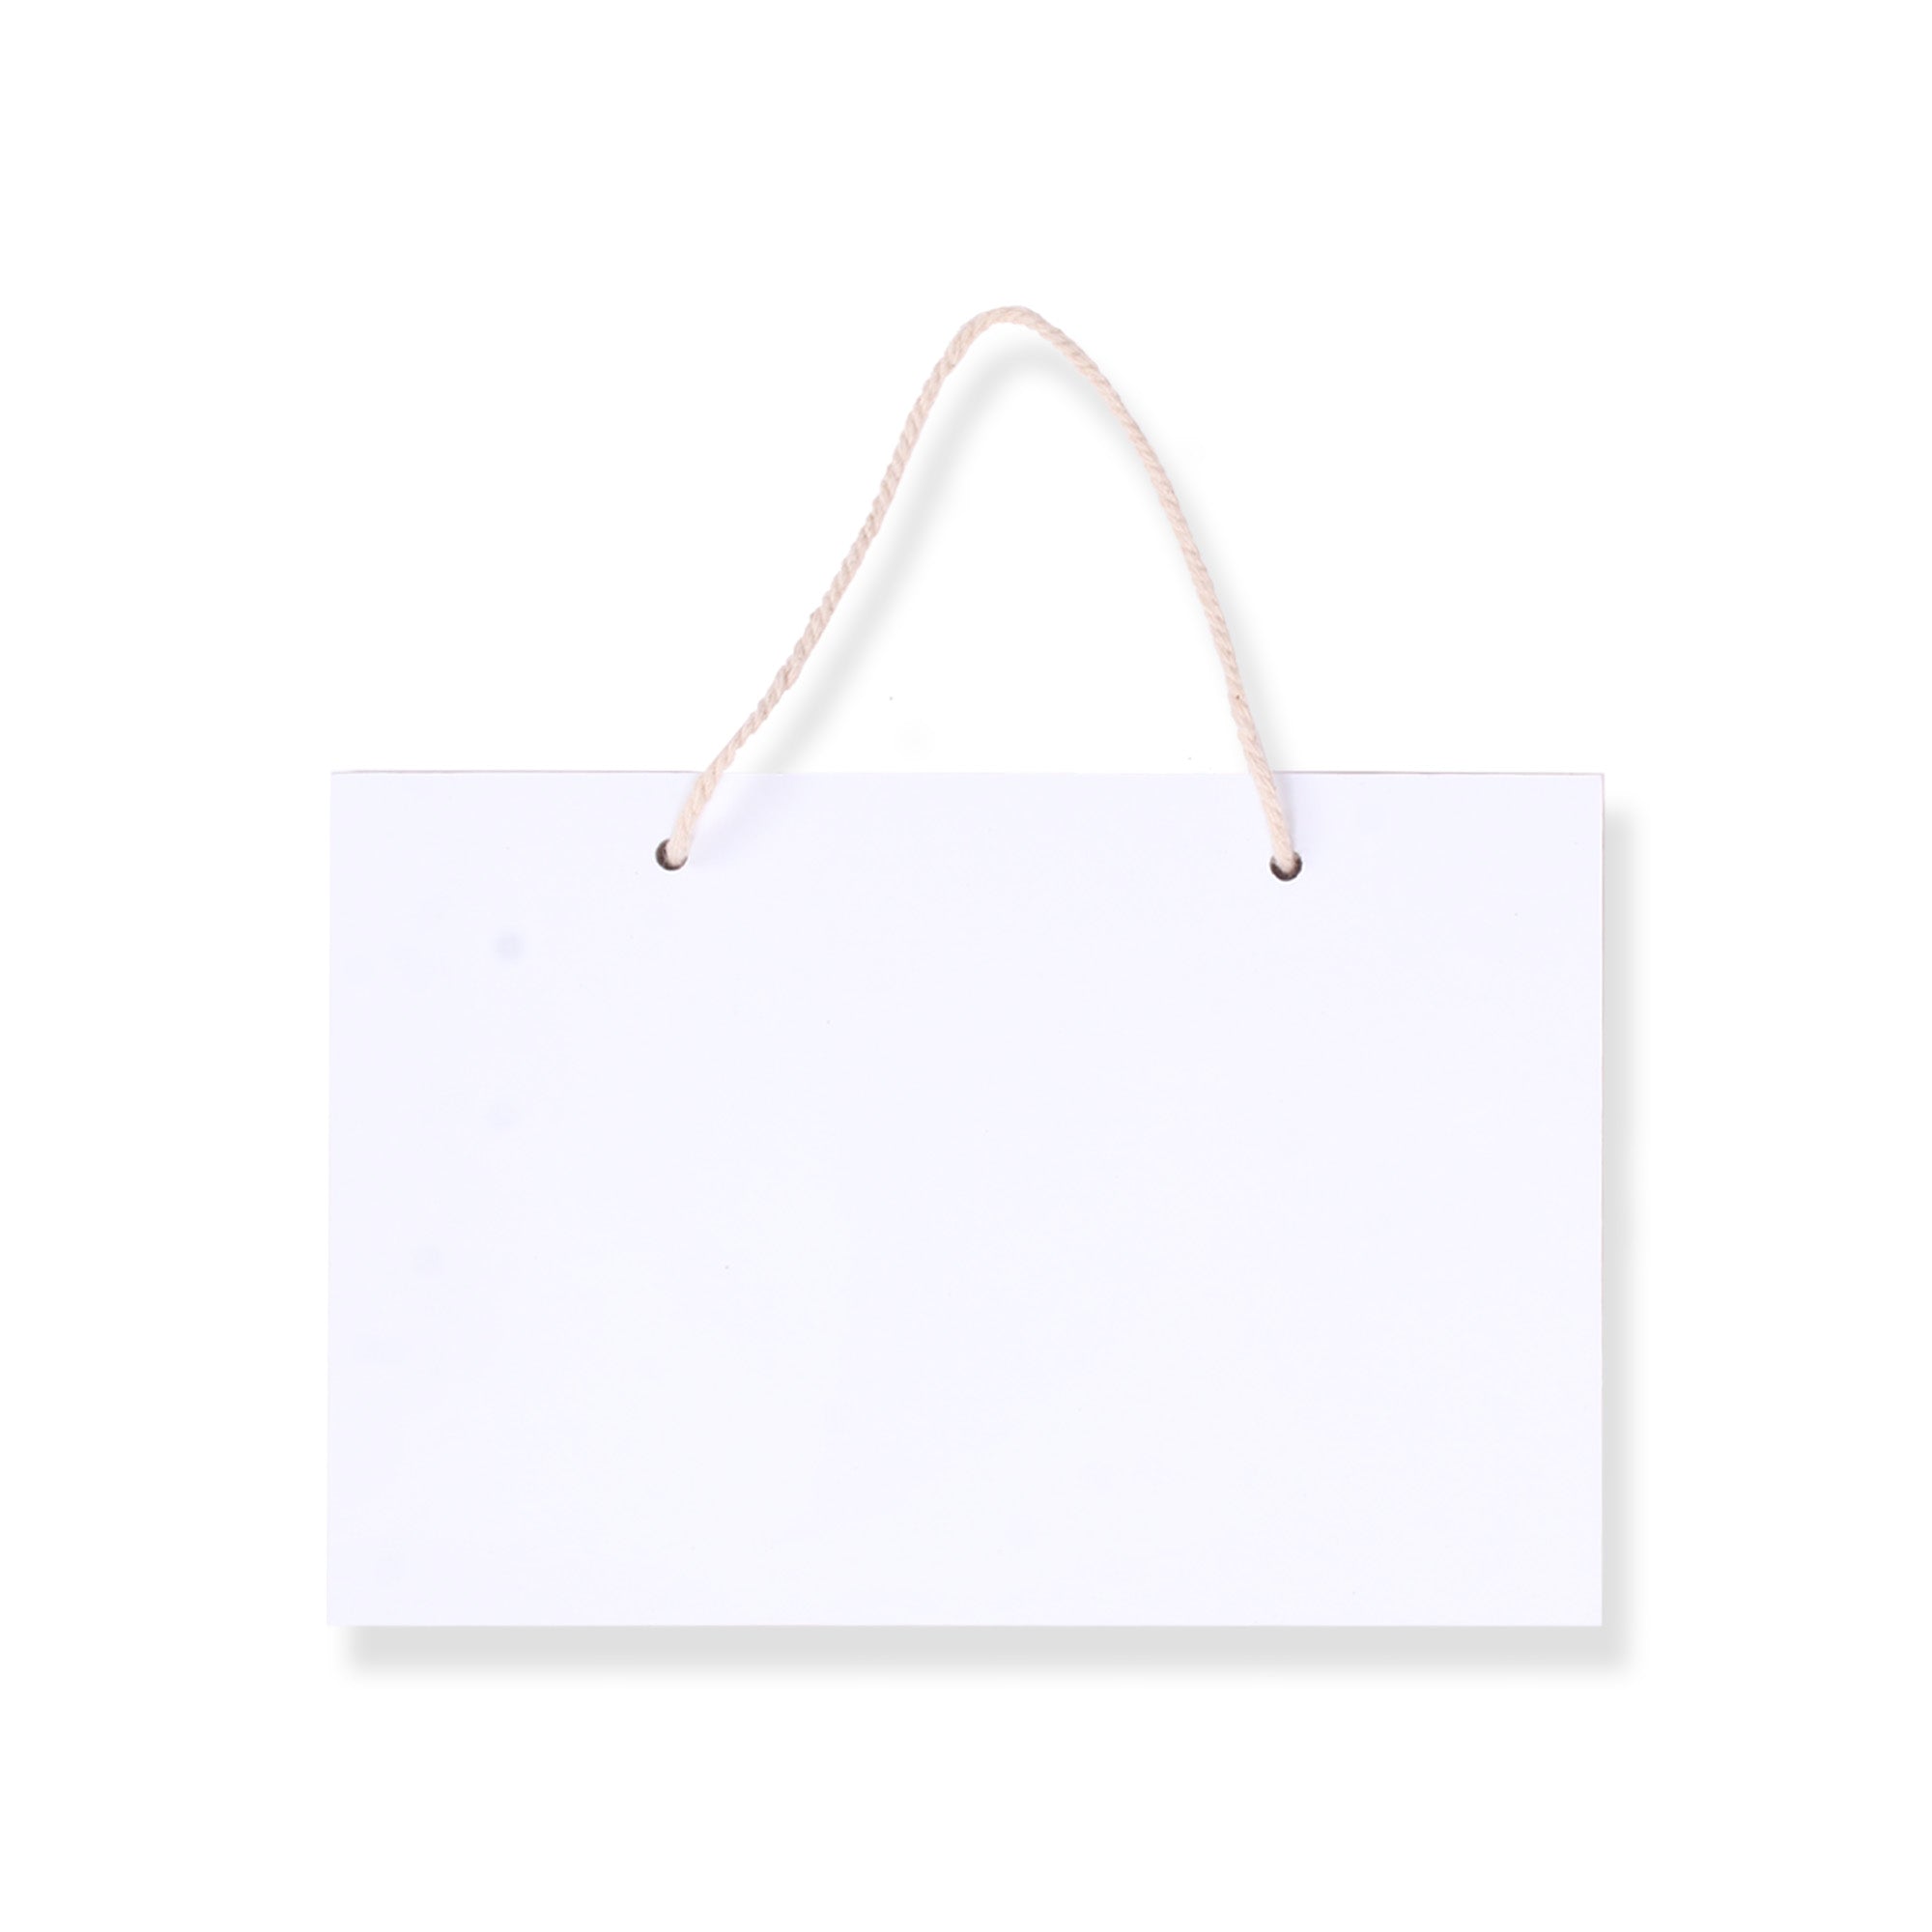 Creative Hanging White Marker Board Landscape Rectangular W12 X H10Inch 5.5Mm Thick 1Pc Lb